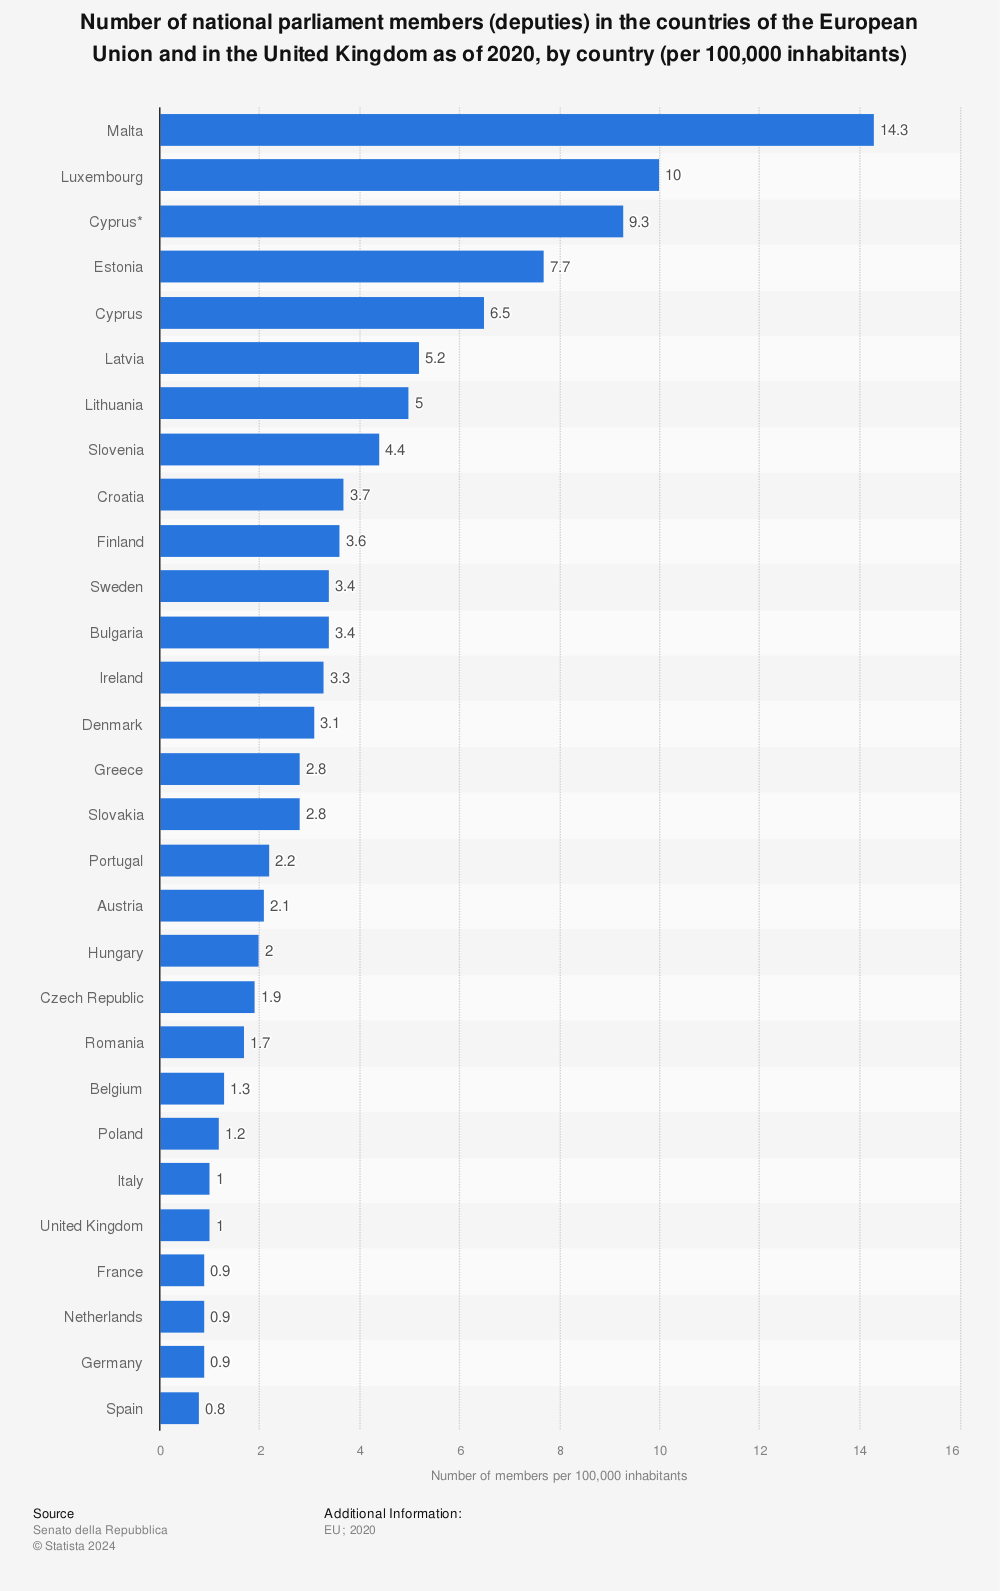 Statistic: Number of national parliament members (deputies) in the countries of the European Union and in the United Kingdom as of 2020, by country (per 100,000 inhabitants) | Statista